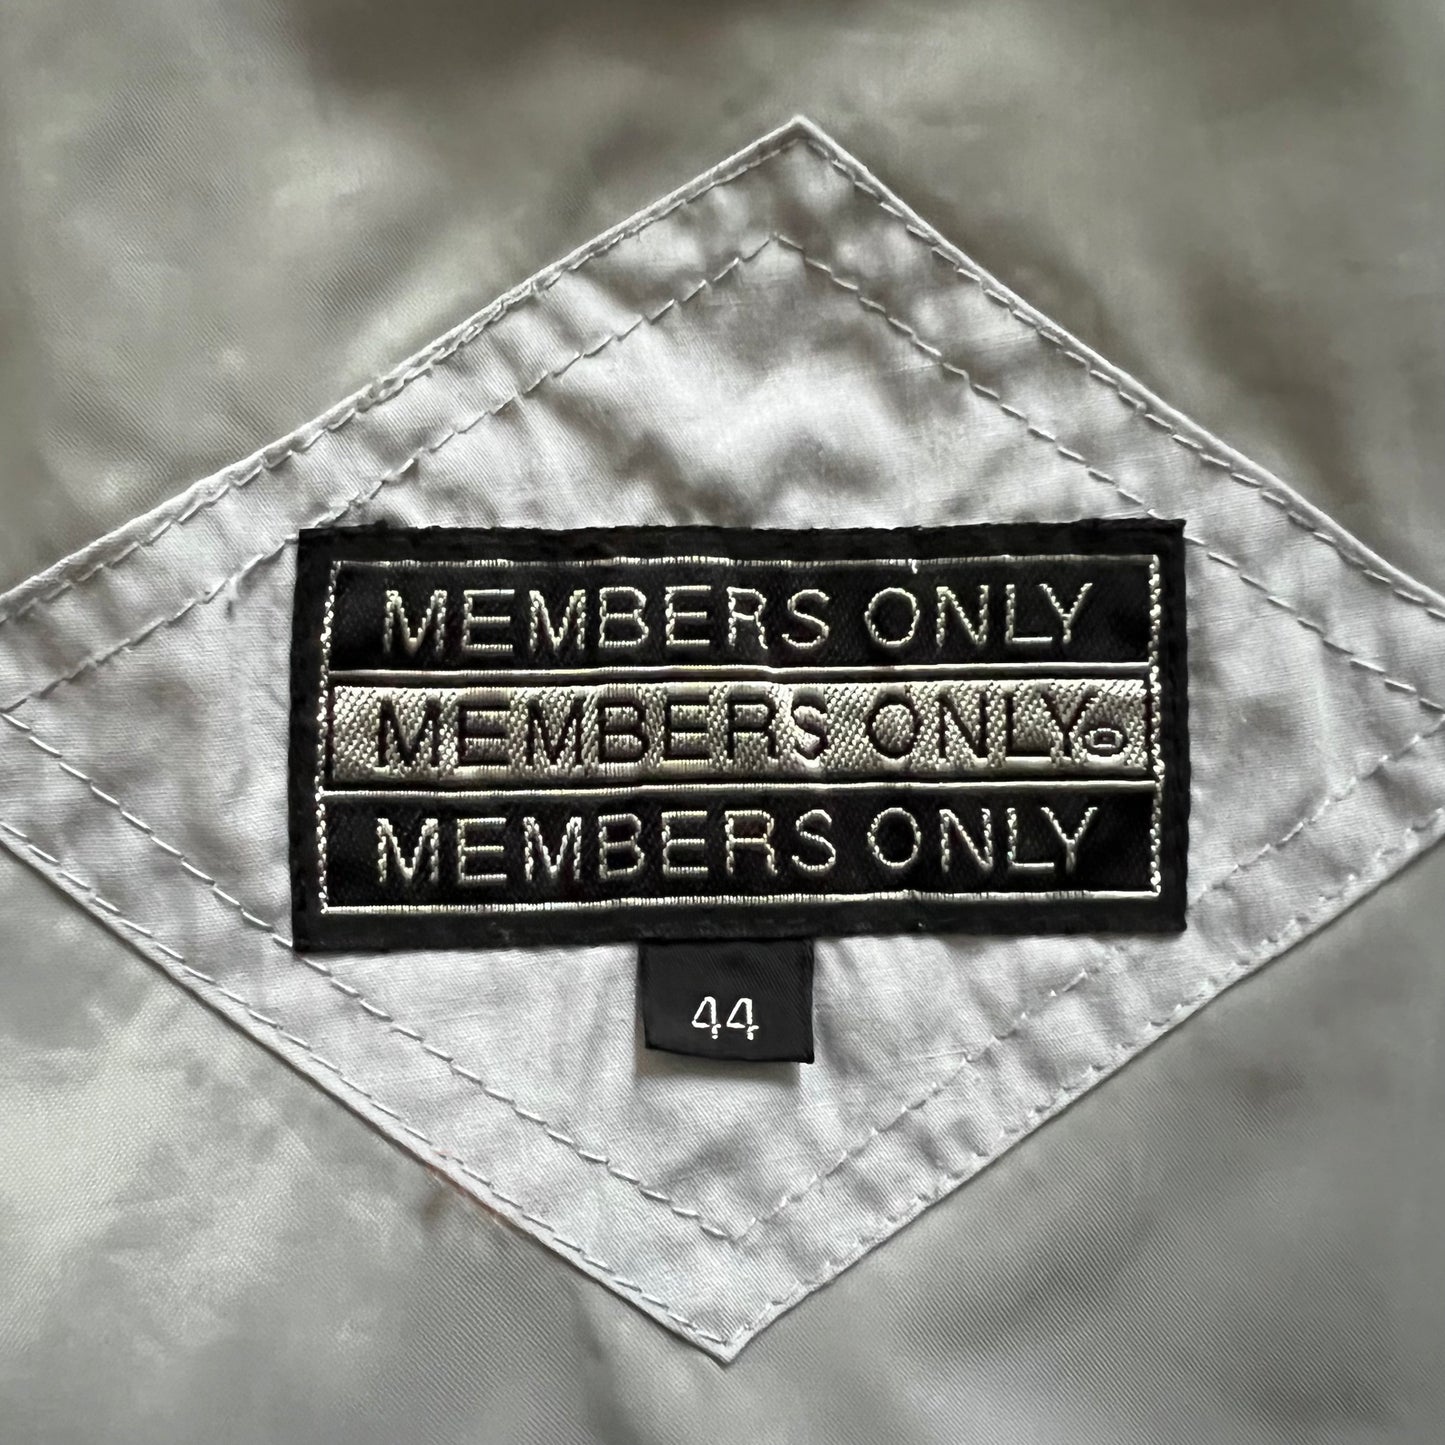 90’s MEMBERS ONLY T/C SINGLE RIDERS JACKET